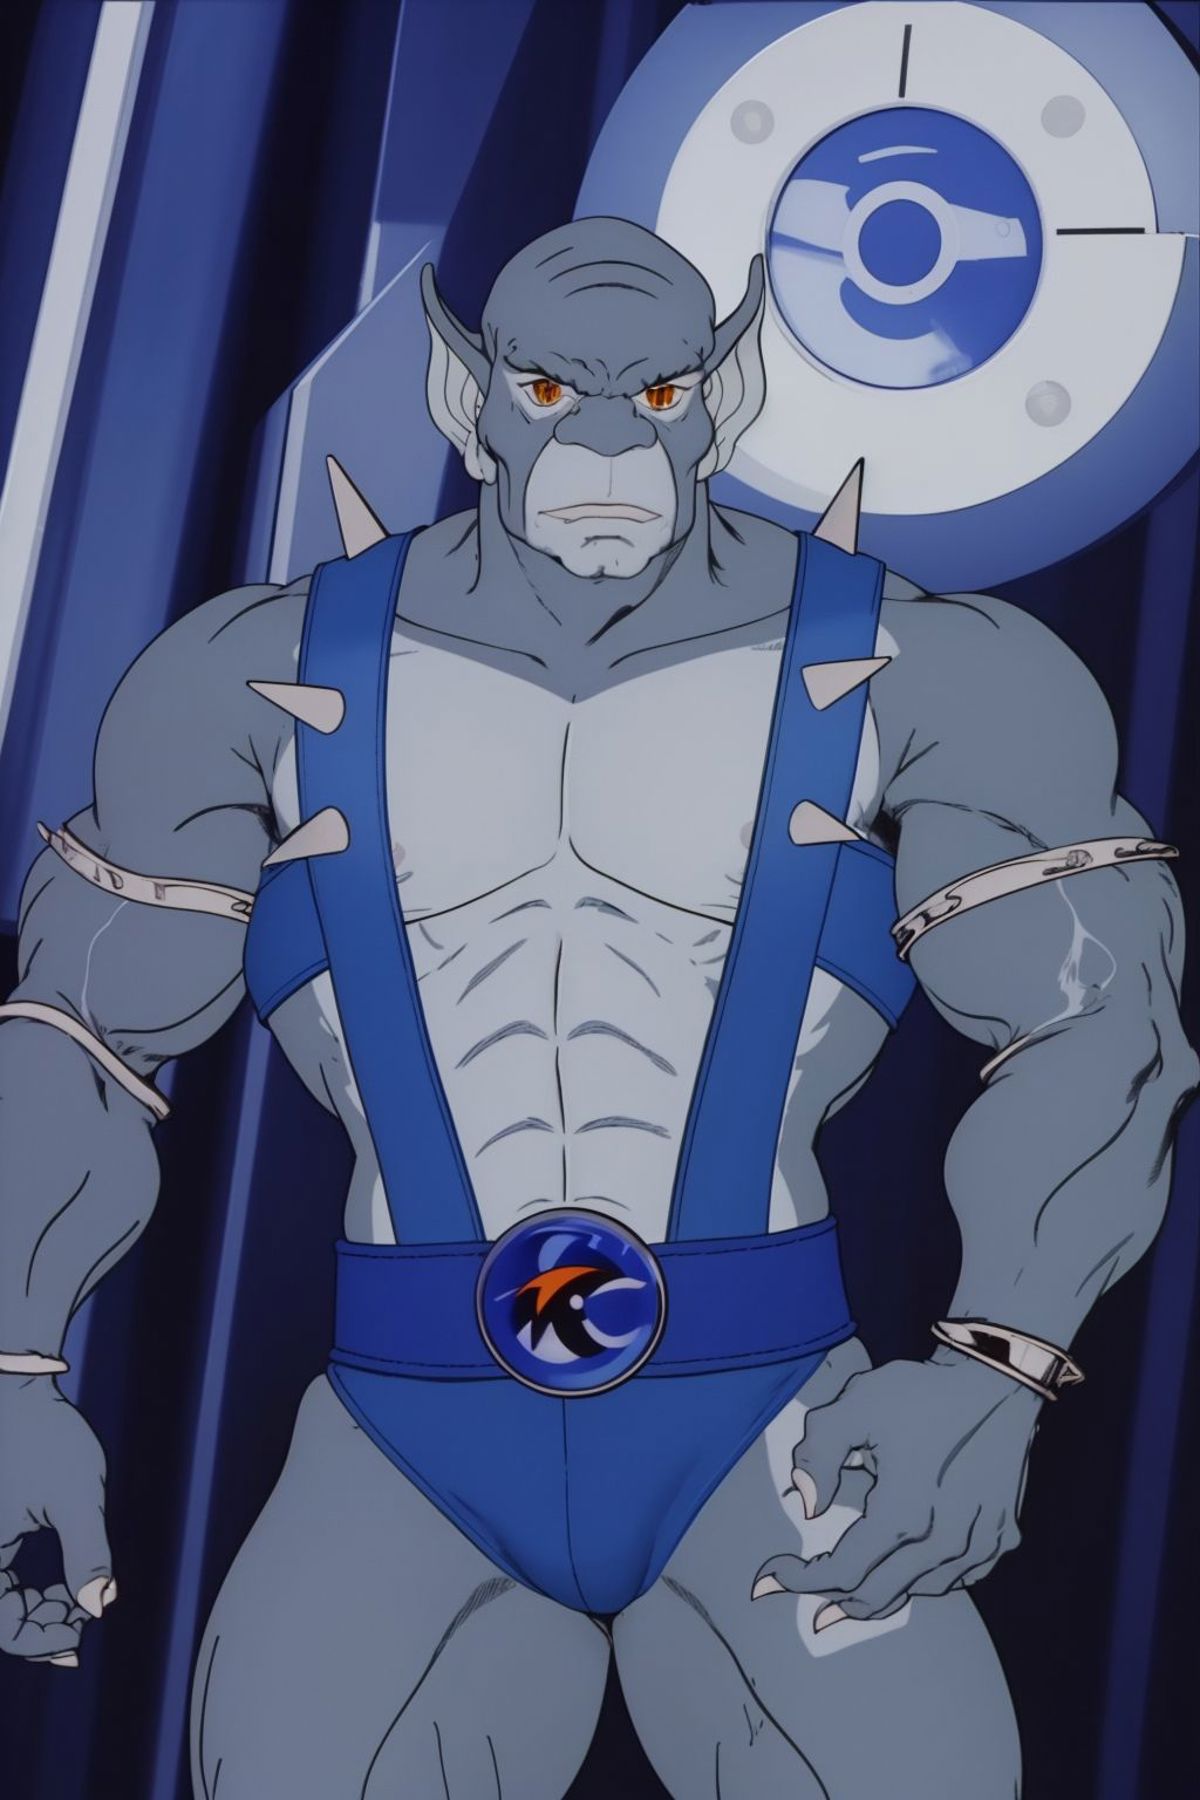 Panthro (Thundercats 80's version) image by Montitto